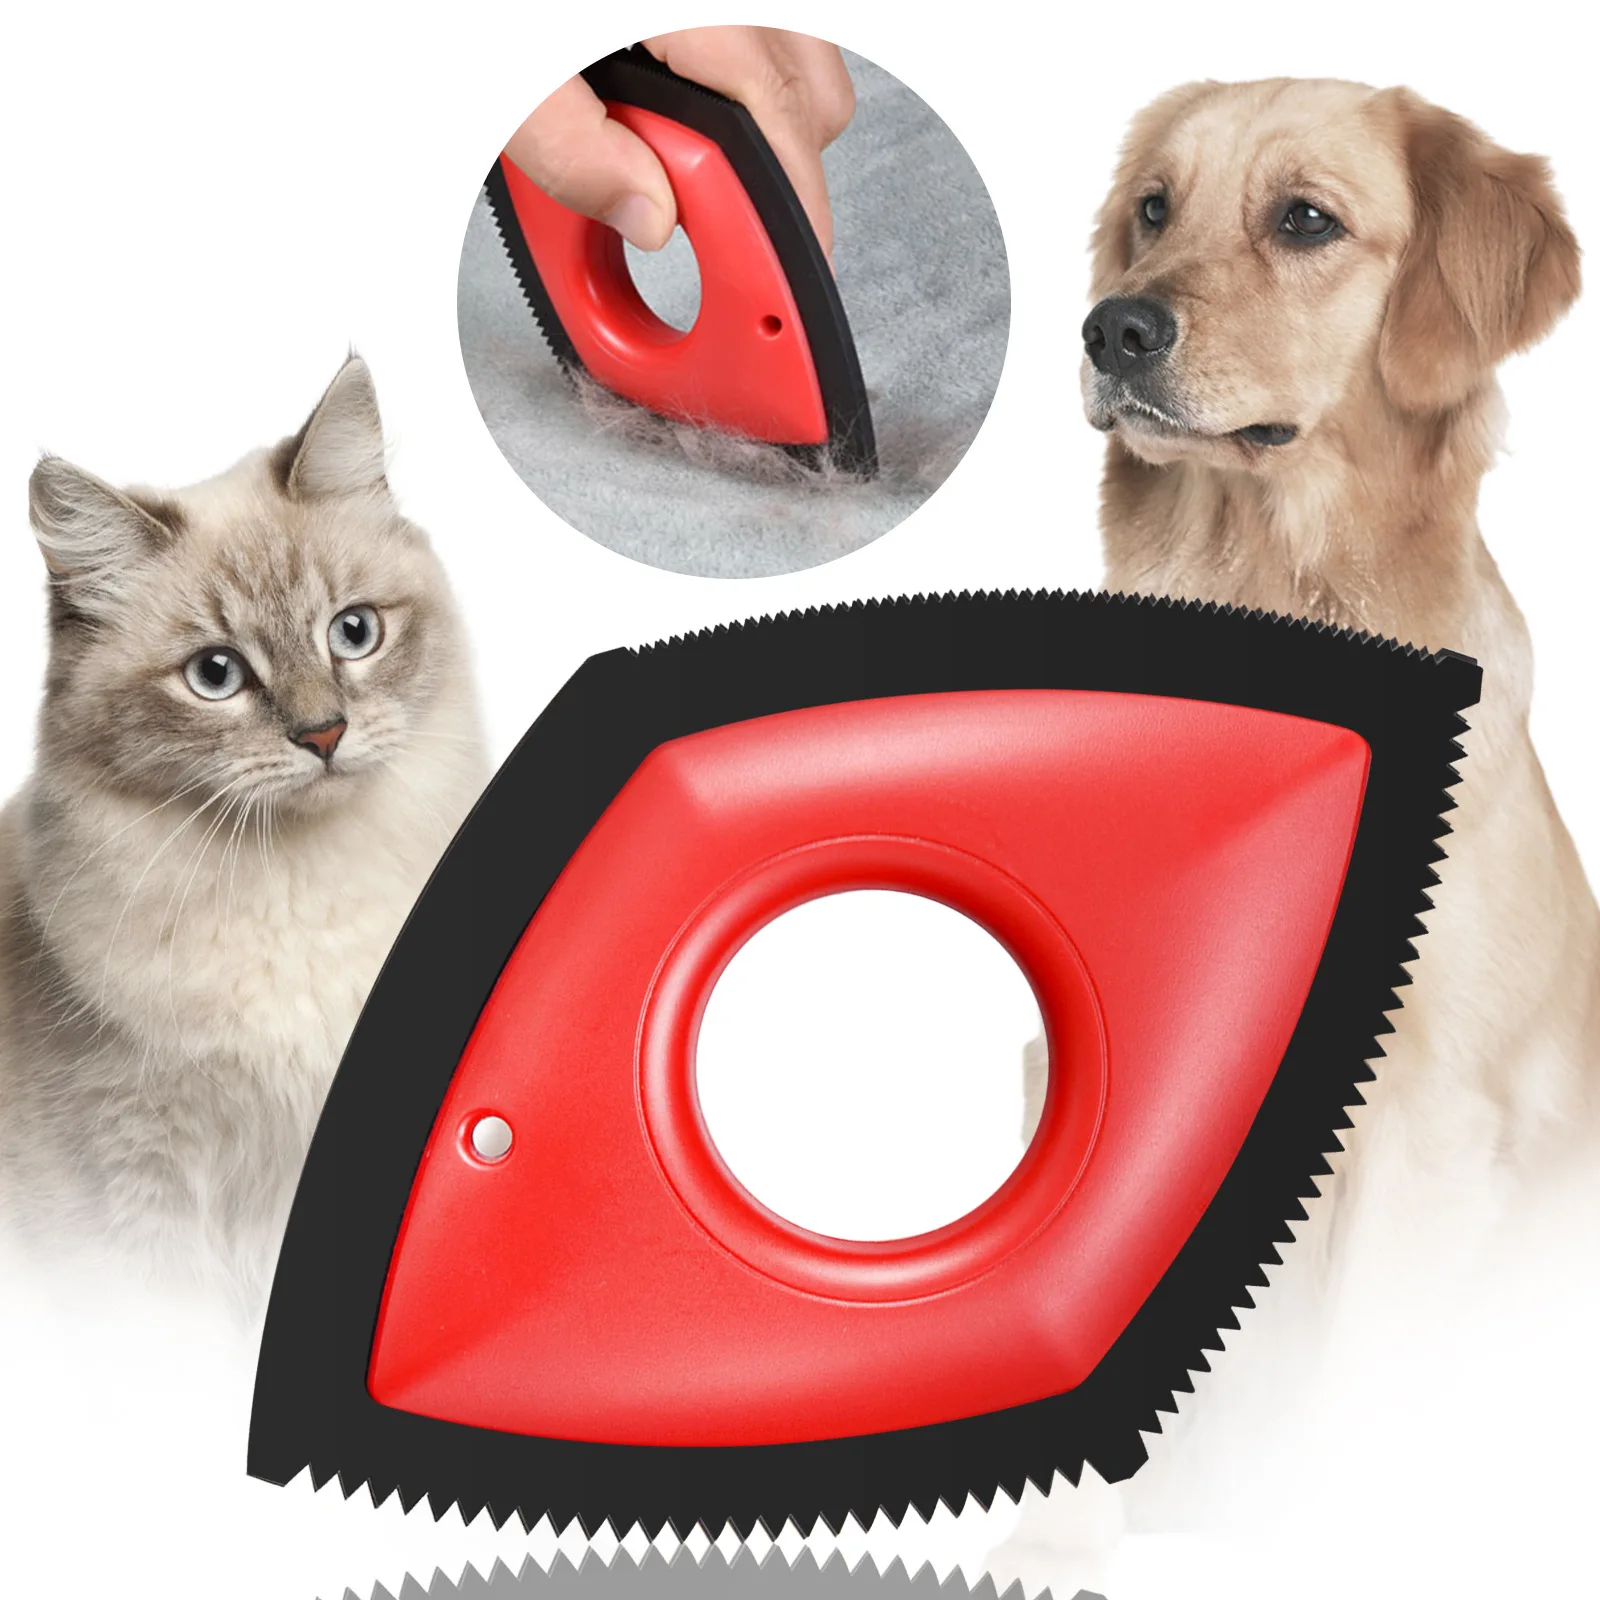 

Rubber Easy To Clean Car Detailing Professional Pet Dog Hair Remover Brush For Couch Car, Red/green/orange/black